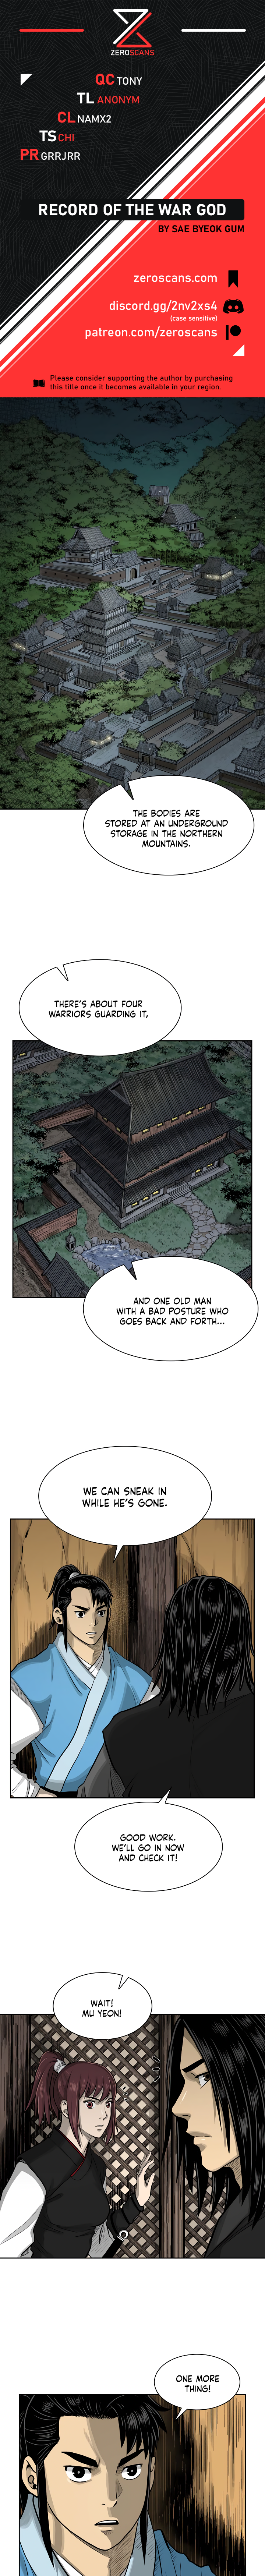 Record of the War God - Chapter 5922 - Image 1